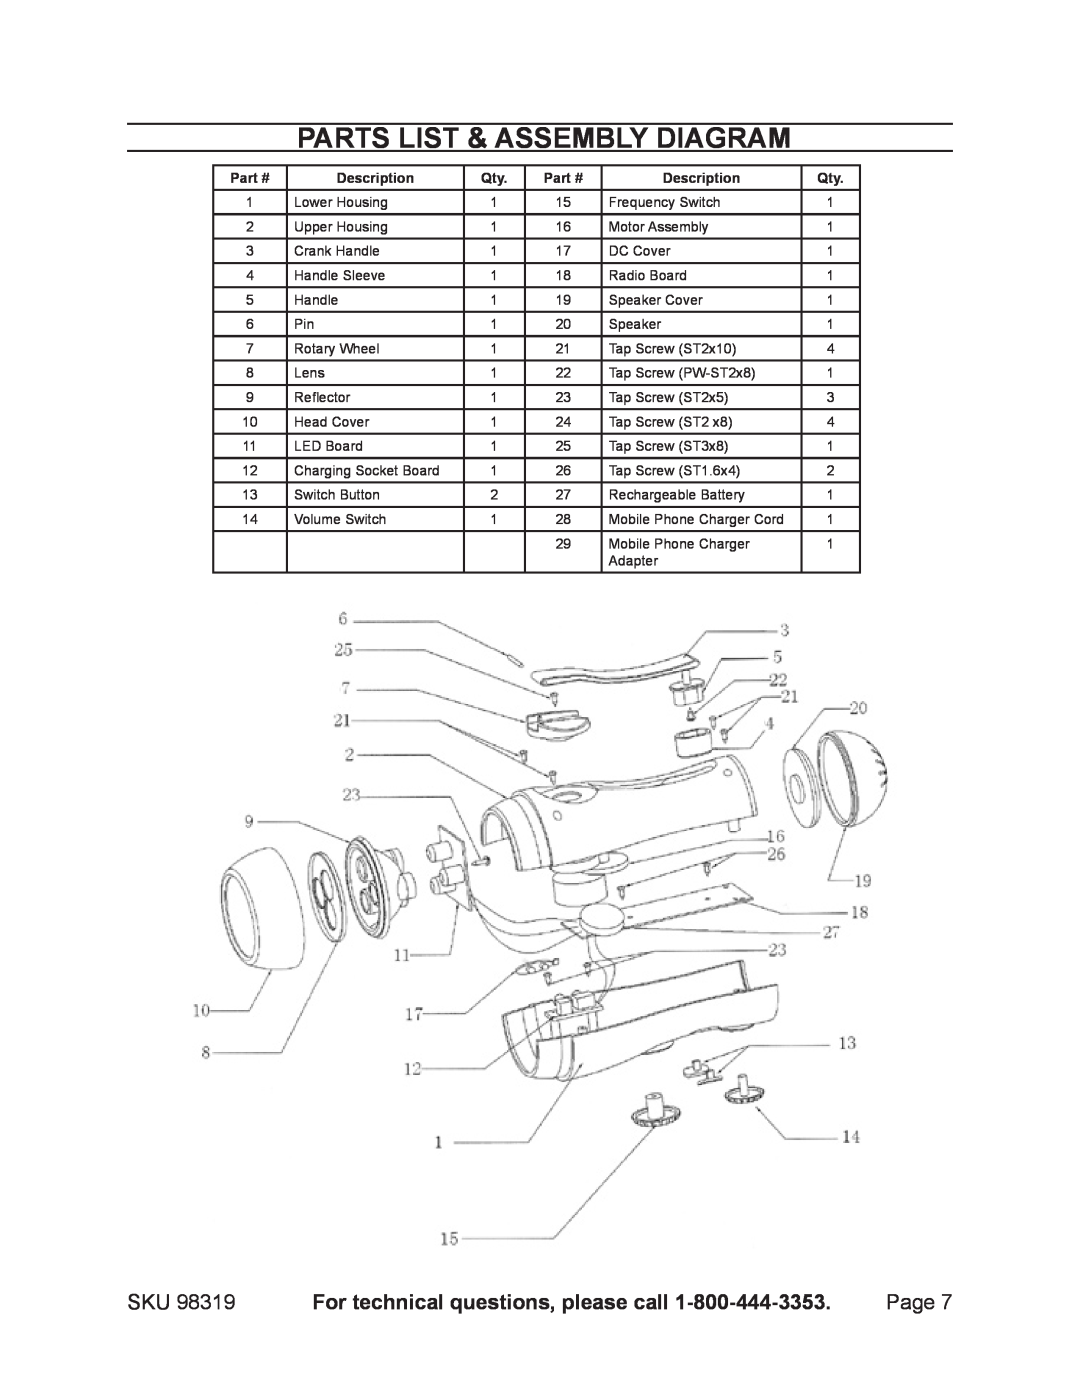 Harbor Freight Tools 98319 manual Parts List & Assembly Diagram, For technical questions, please call, Description 